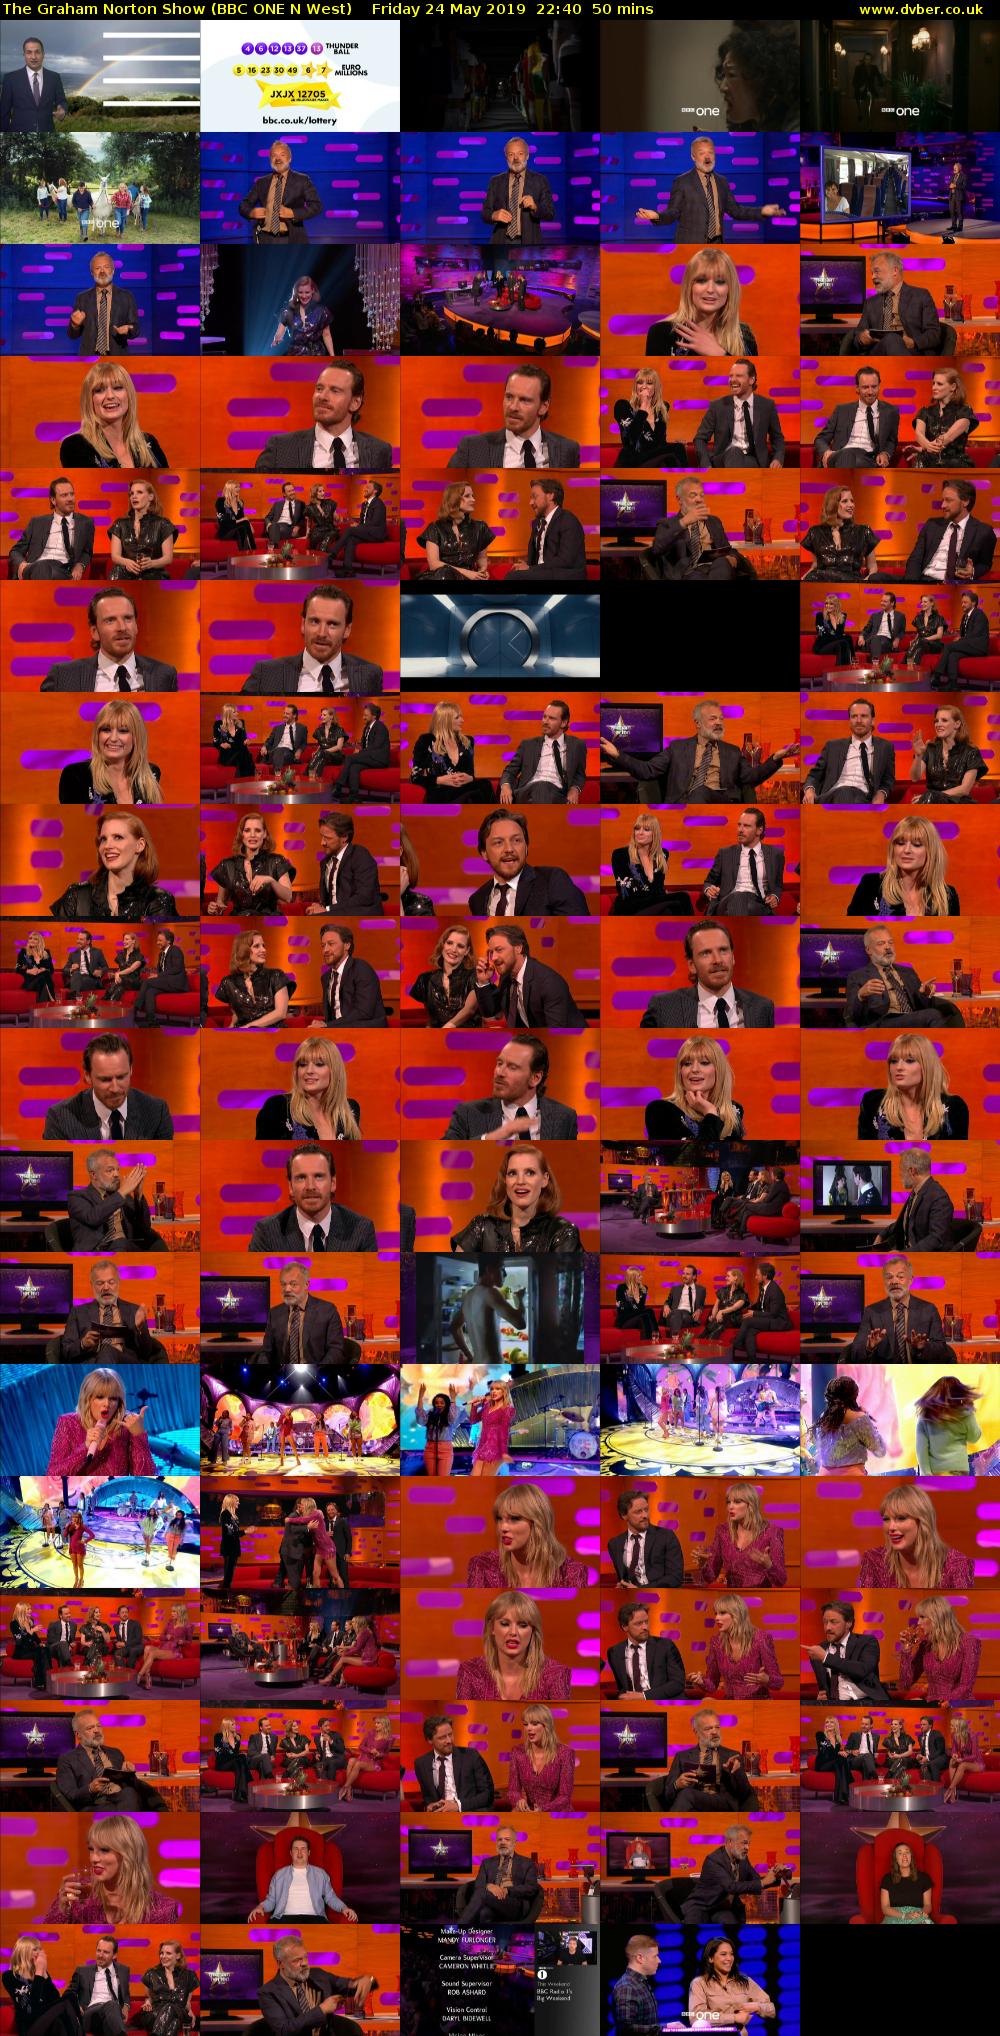 The Graham Norton Show (BBC ONE N West) Friday 24 May 2019 22:40 - 23:30